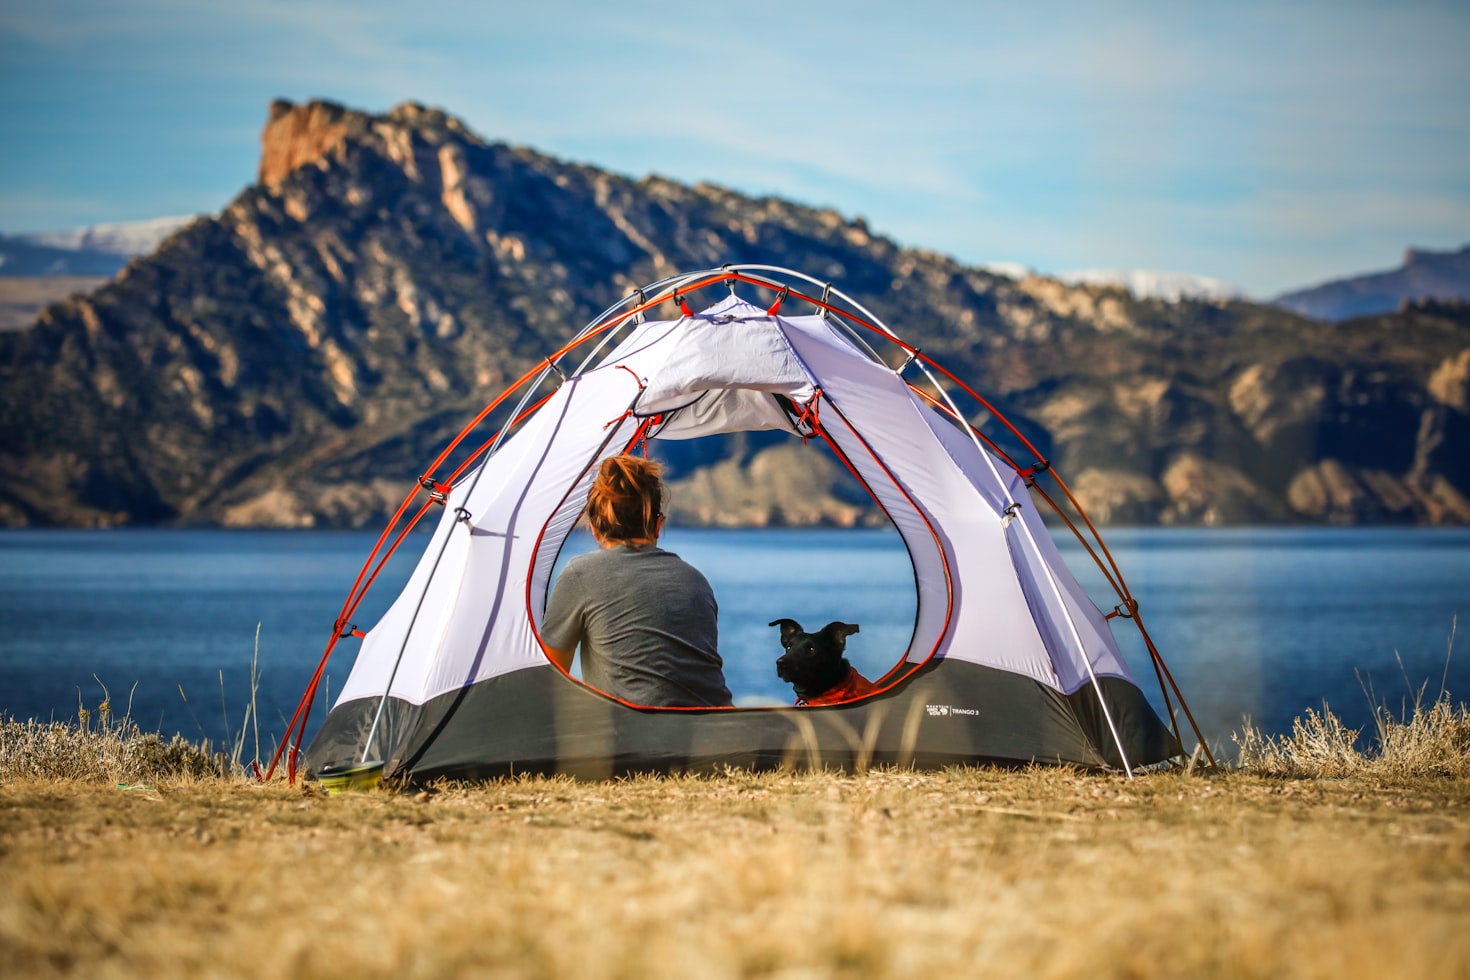 Woman sitting in tent with black dog looking out at lake and mountain landscape.